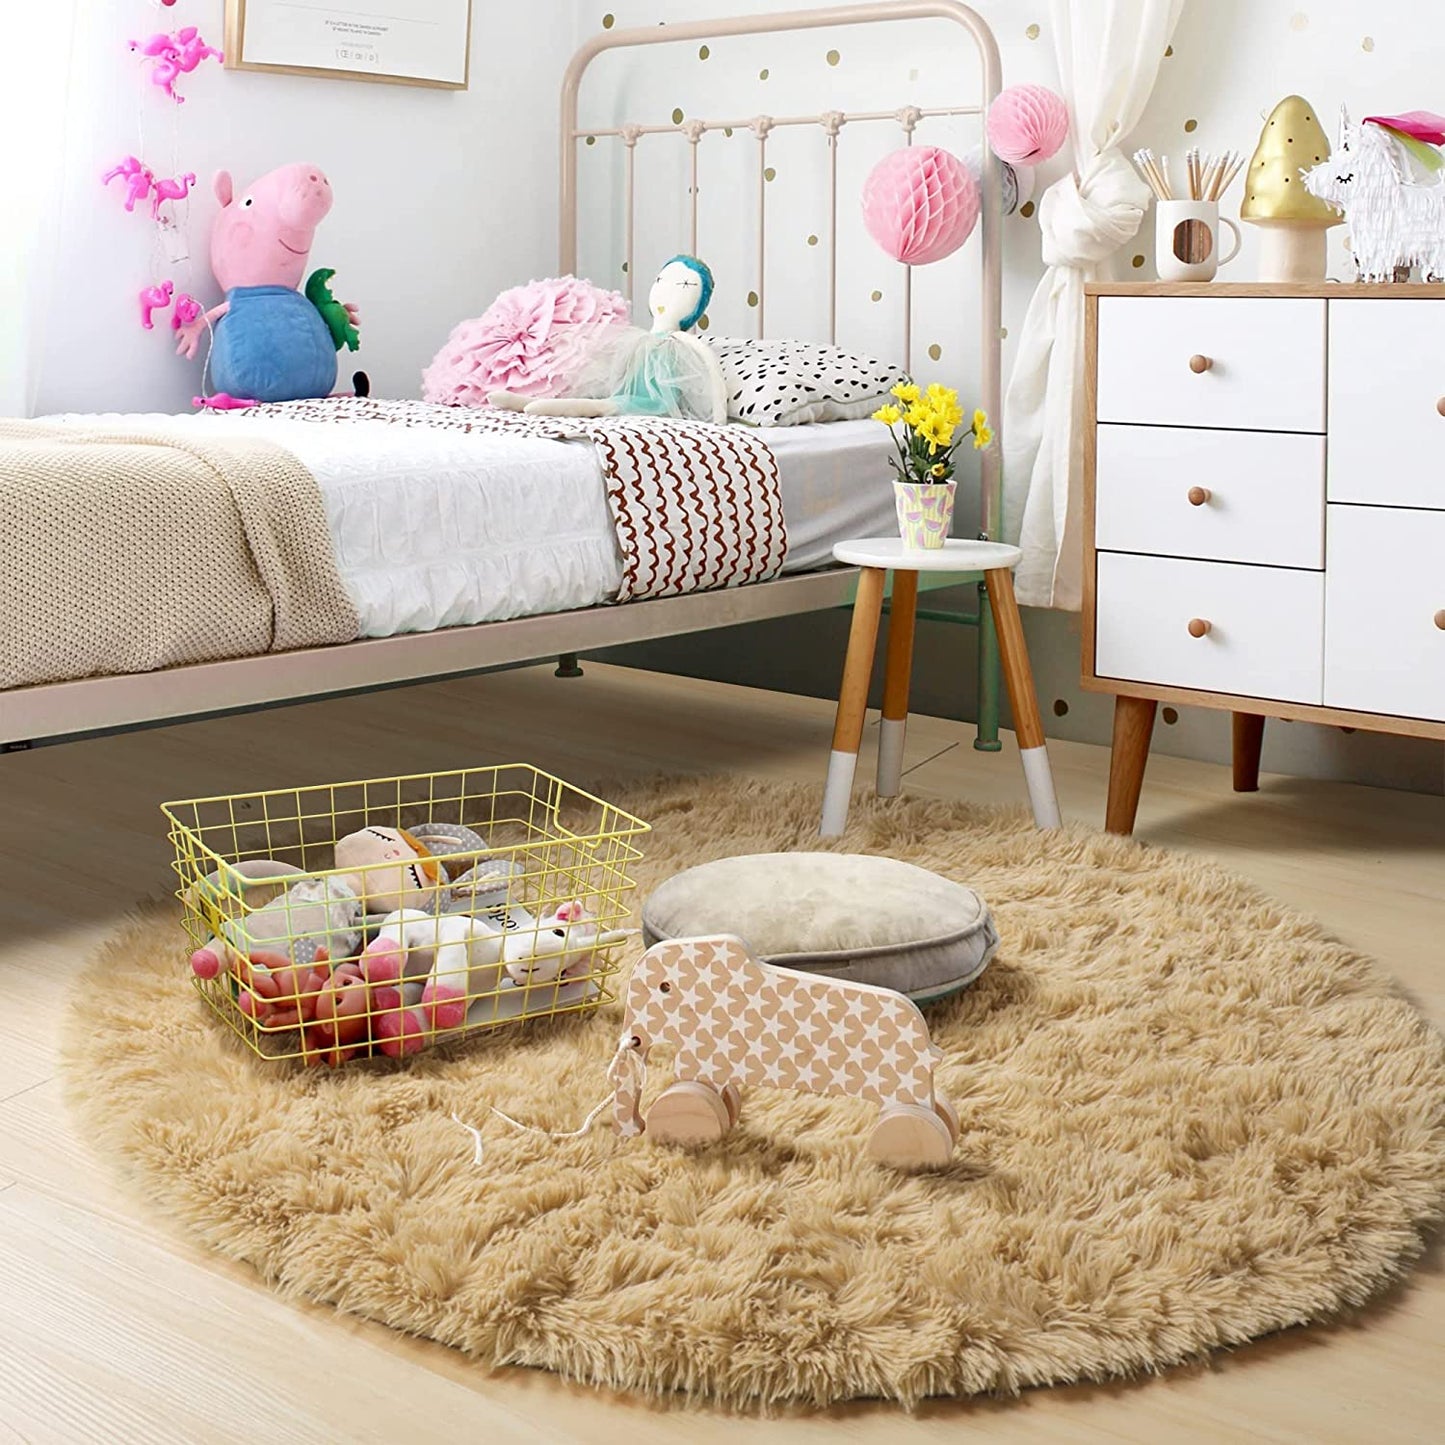 Beige round Rug for Bedroom,Fluffy Circle Rug 4'X4' for Kids Room,Furry Carpet for Teen'S Room,Shaggy Circular Rug for Nursery Room,Fuzzy Plush Rug for Dorm,Beige Carpet,Cute Room Decor for Baby